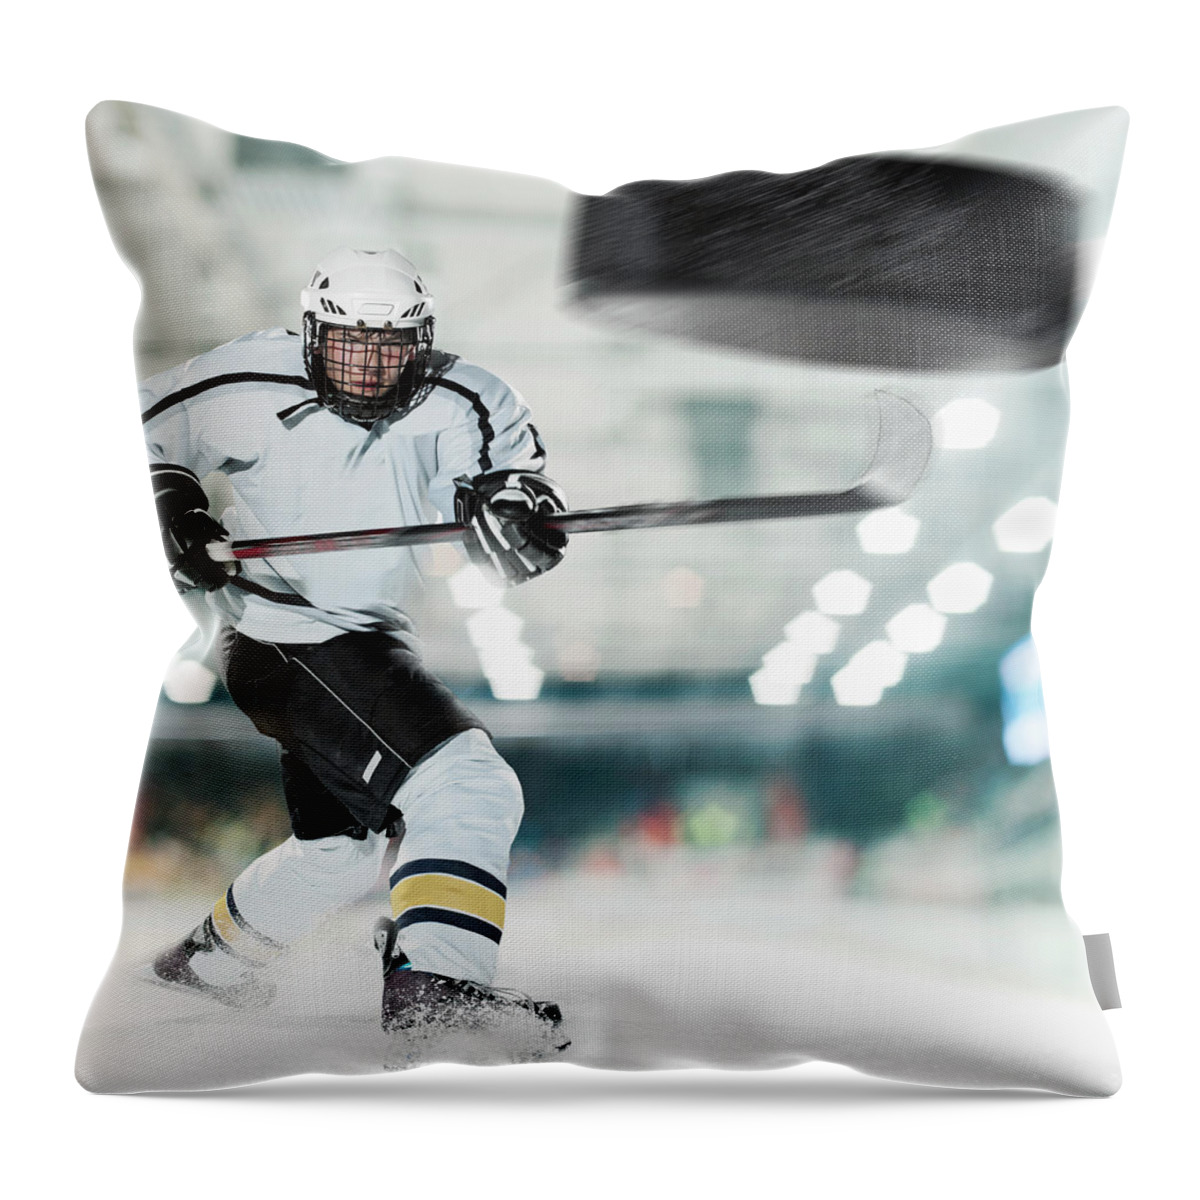 Puck Shot By Ice Hockey Player Throw Pillow by Bernhard Lang 